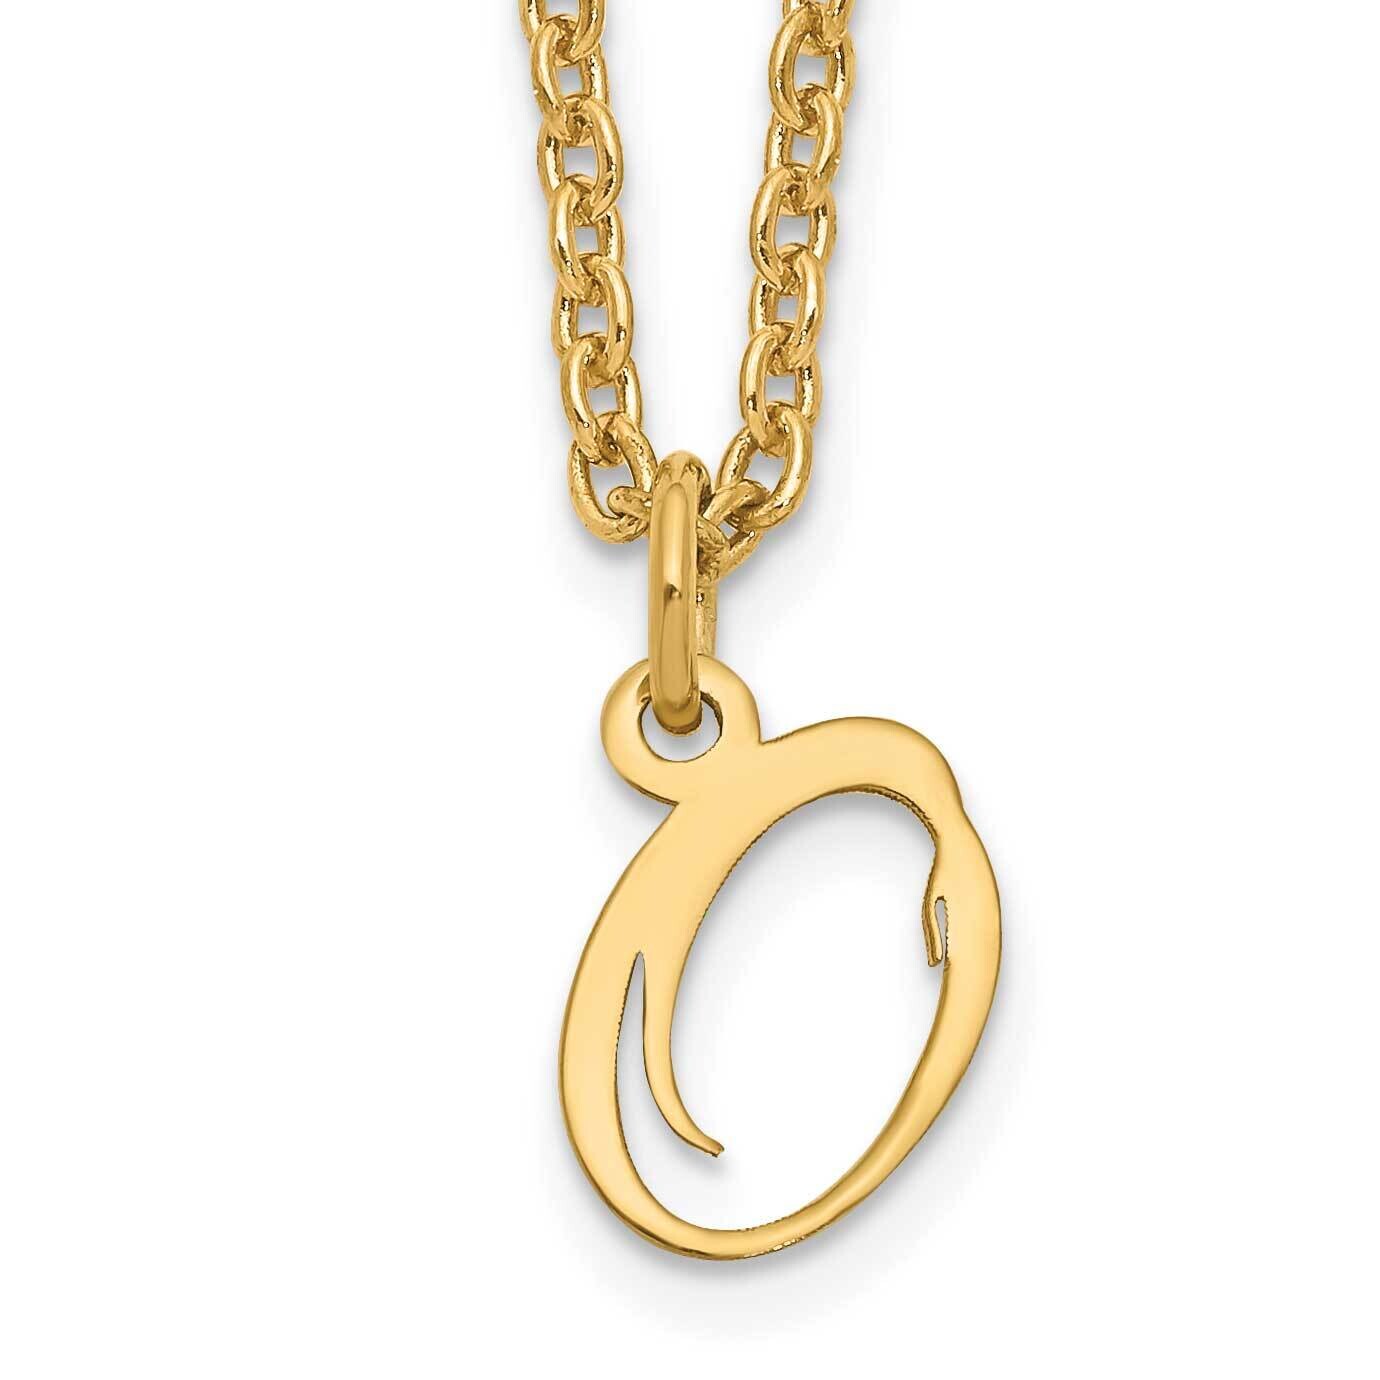 Gold-Plated Letter O Initial Necklace Sterling Silver XNA756GP/O